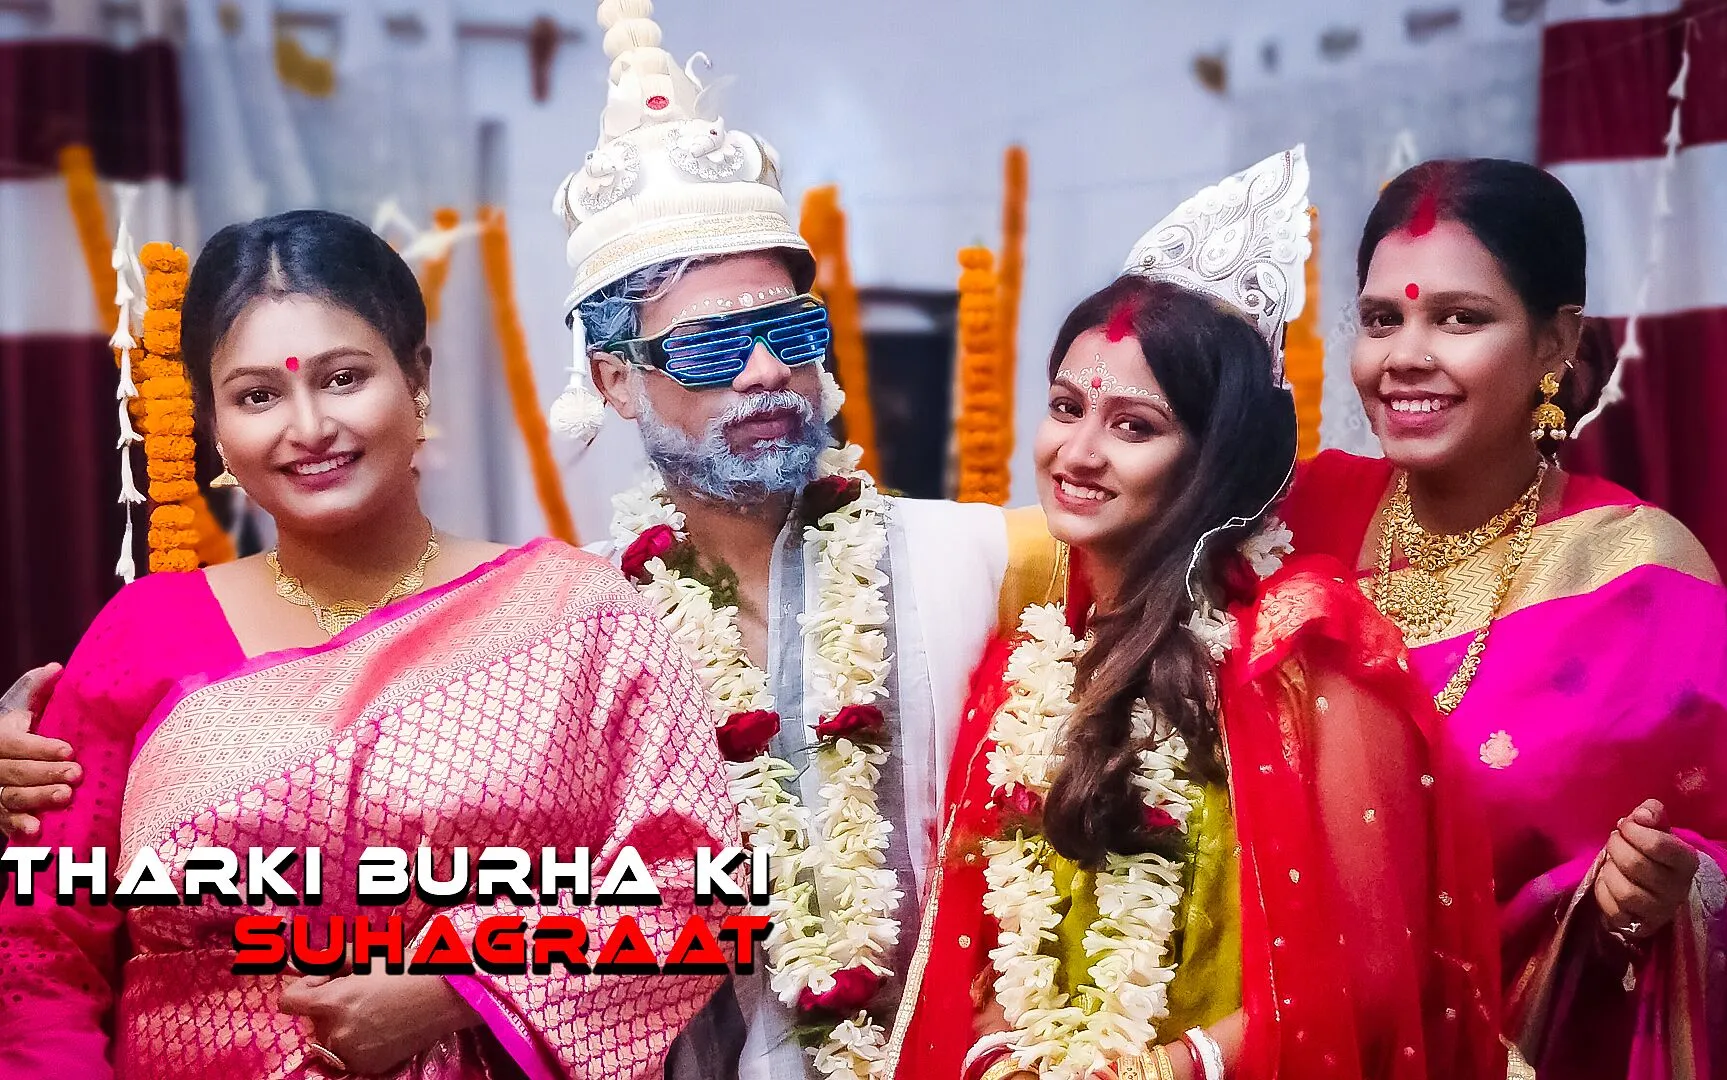 Crazy old man turns out to celebrate honeymoon with his three newly wed wives by Cine Flix Media Faphouse